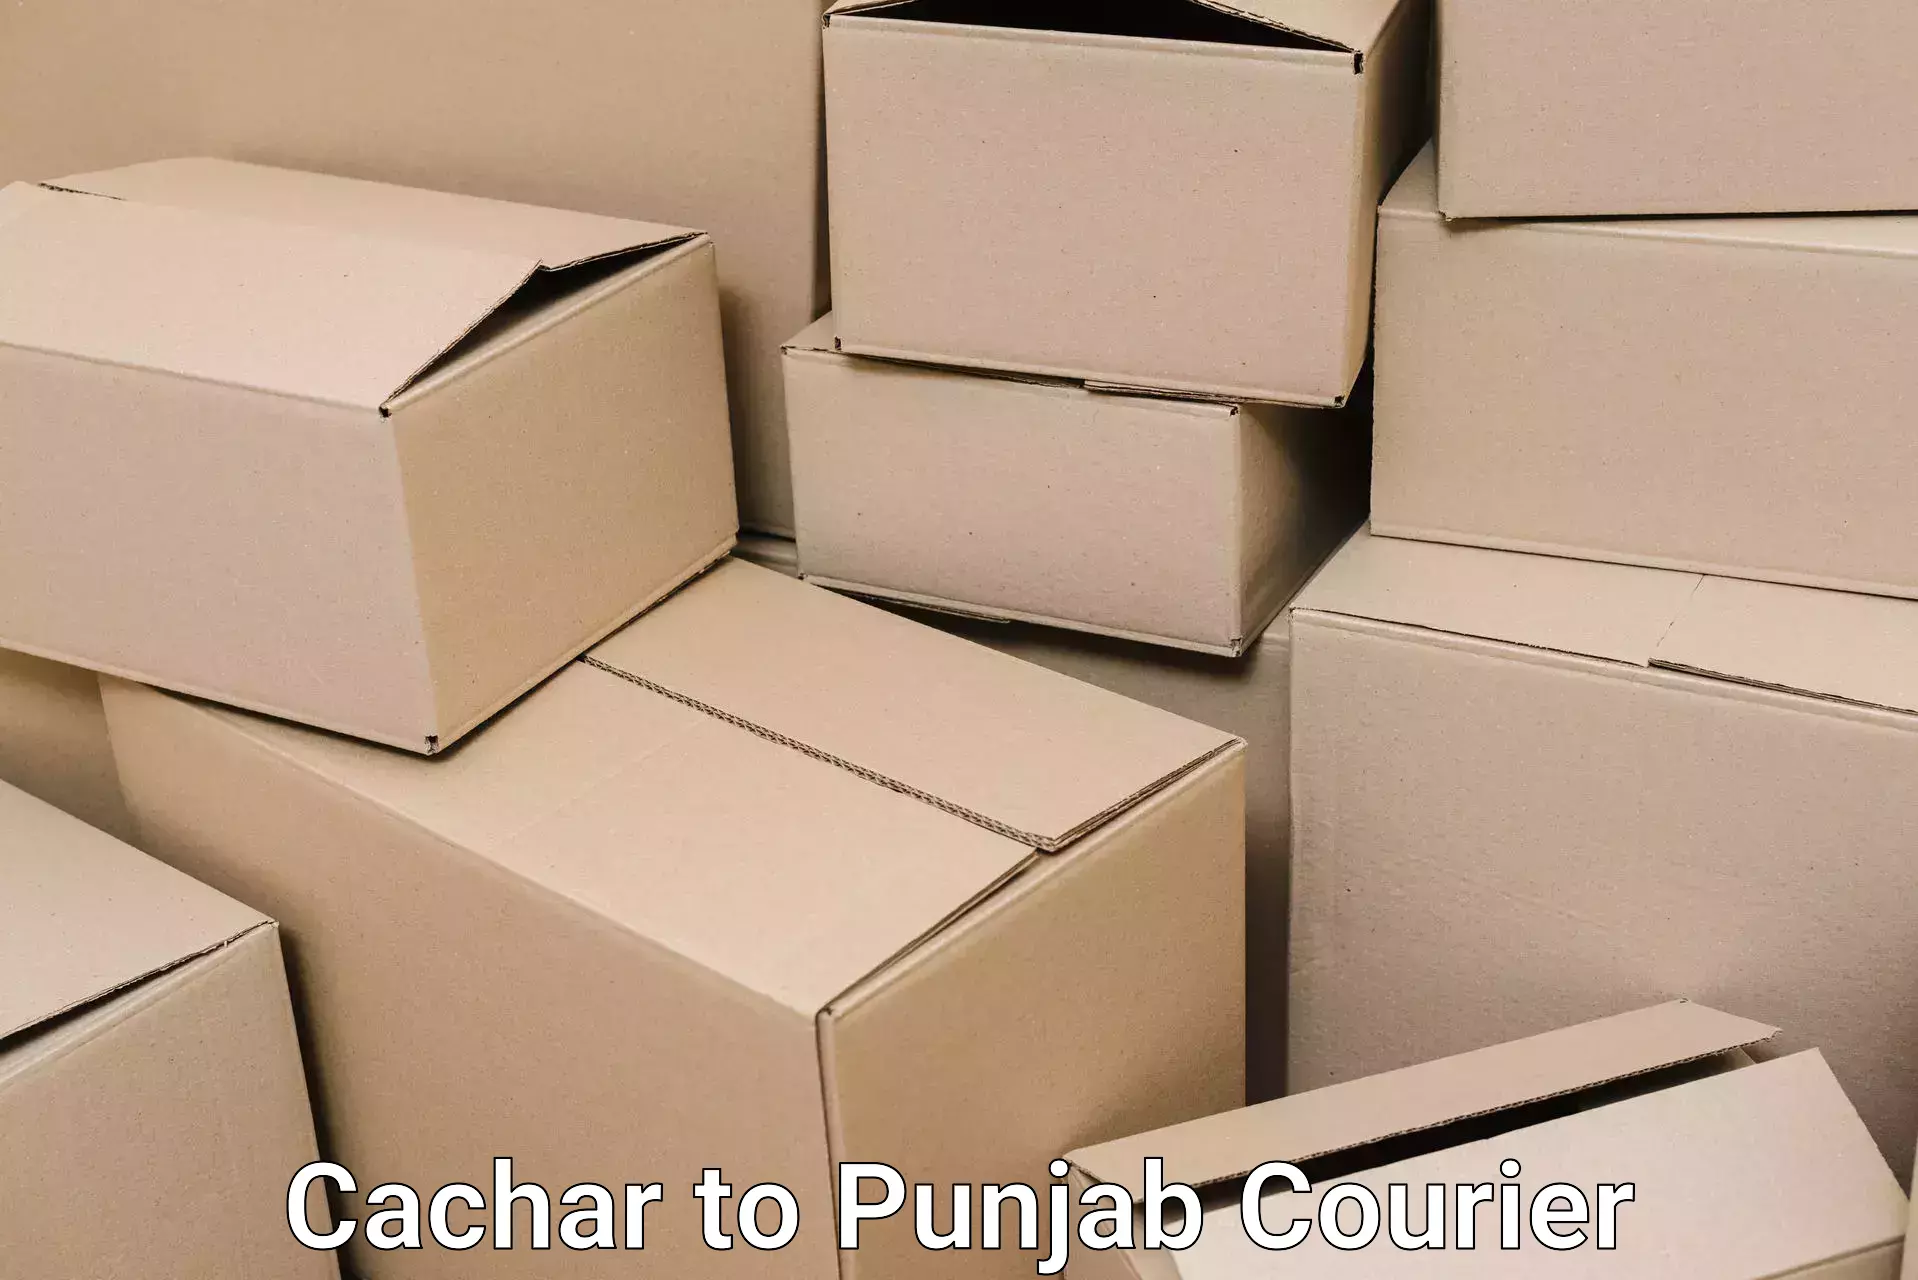 Quality relocation assistance Cachar to Punjab